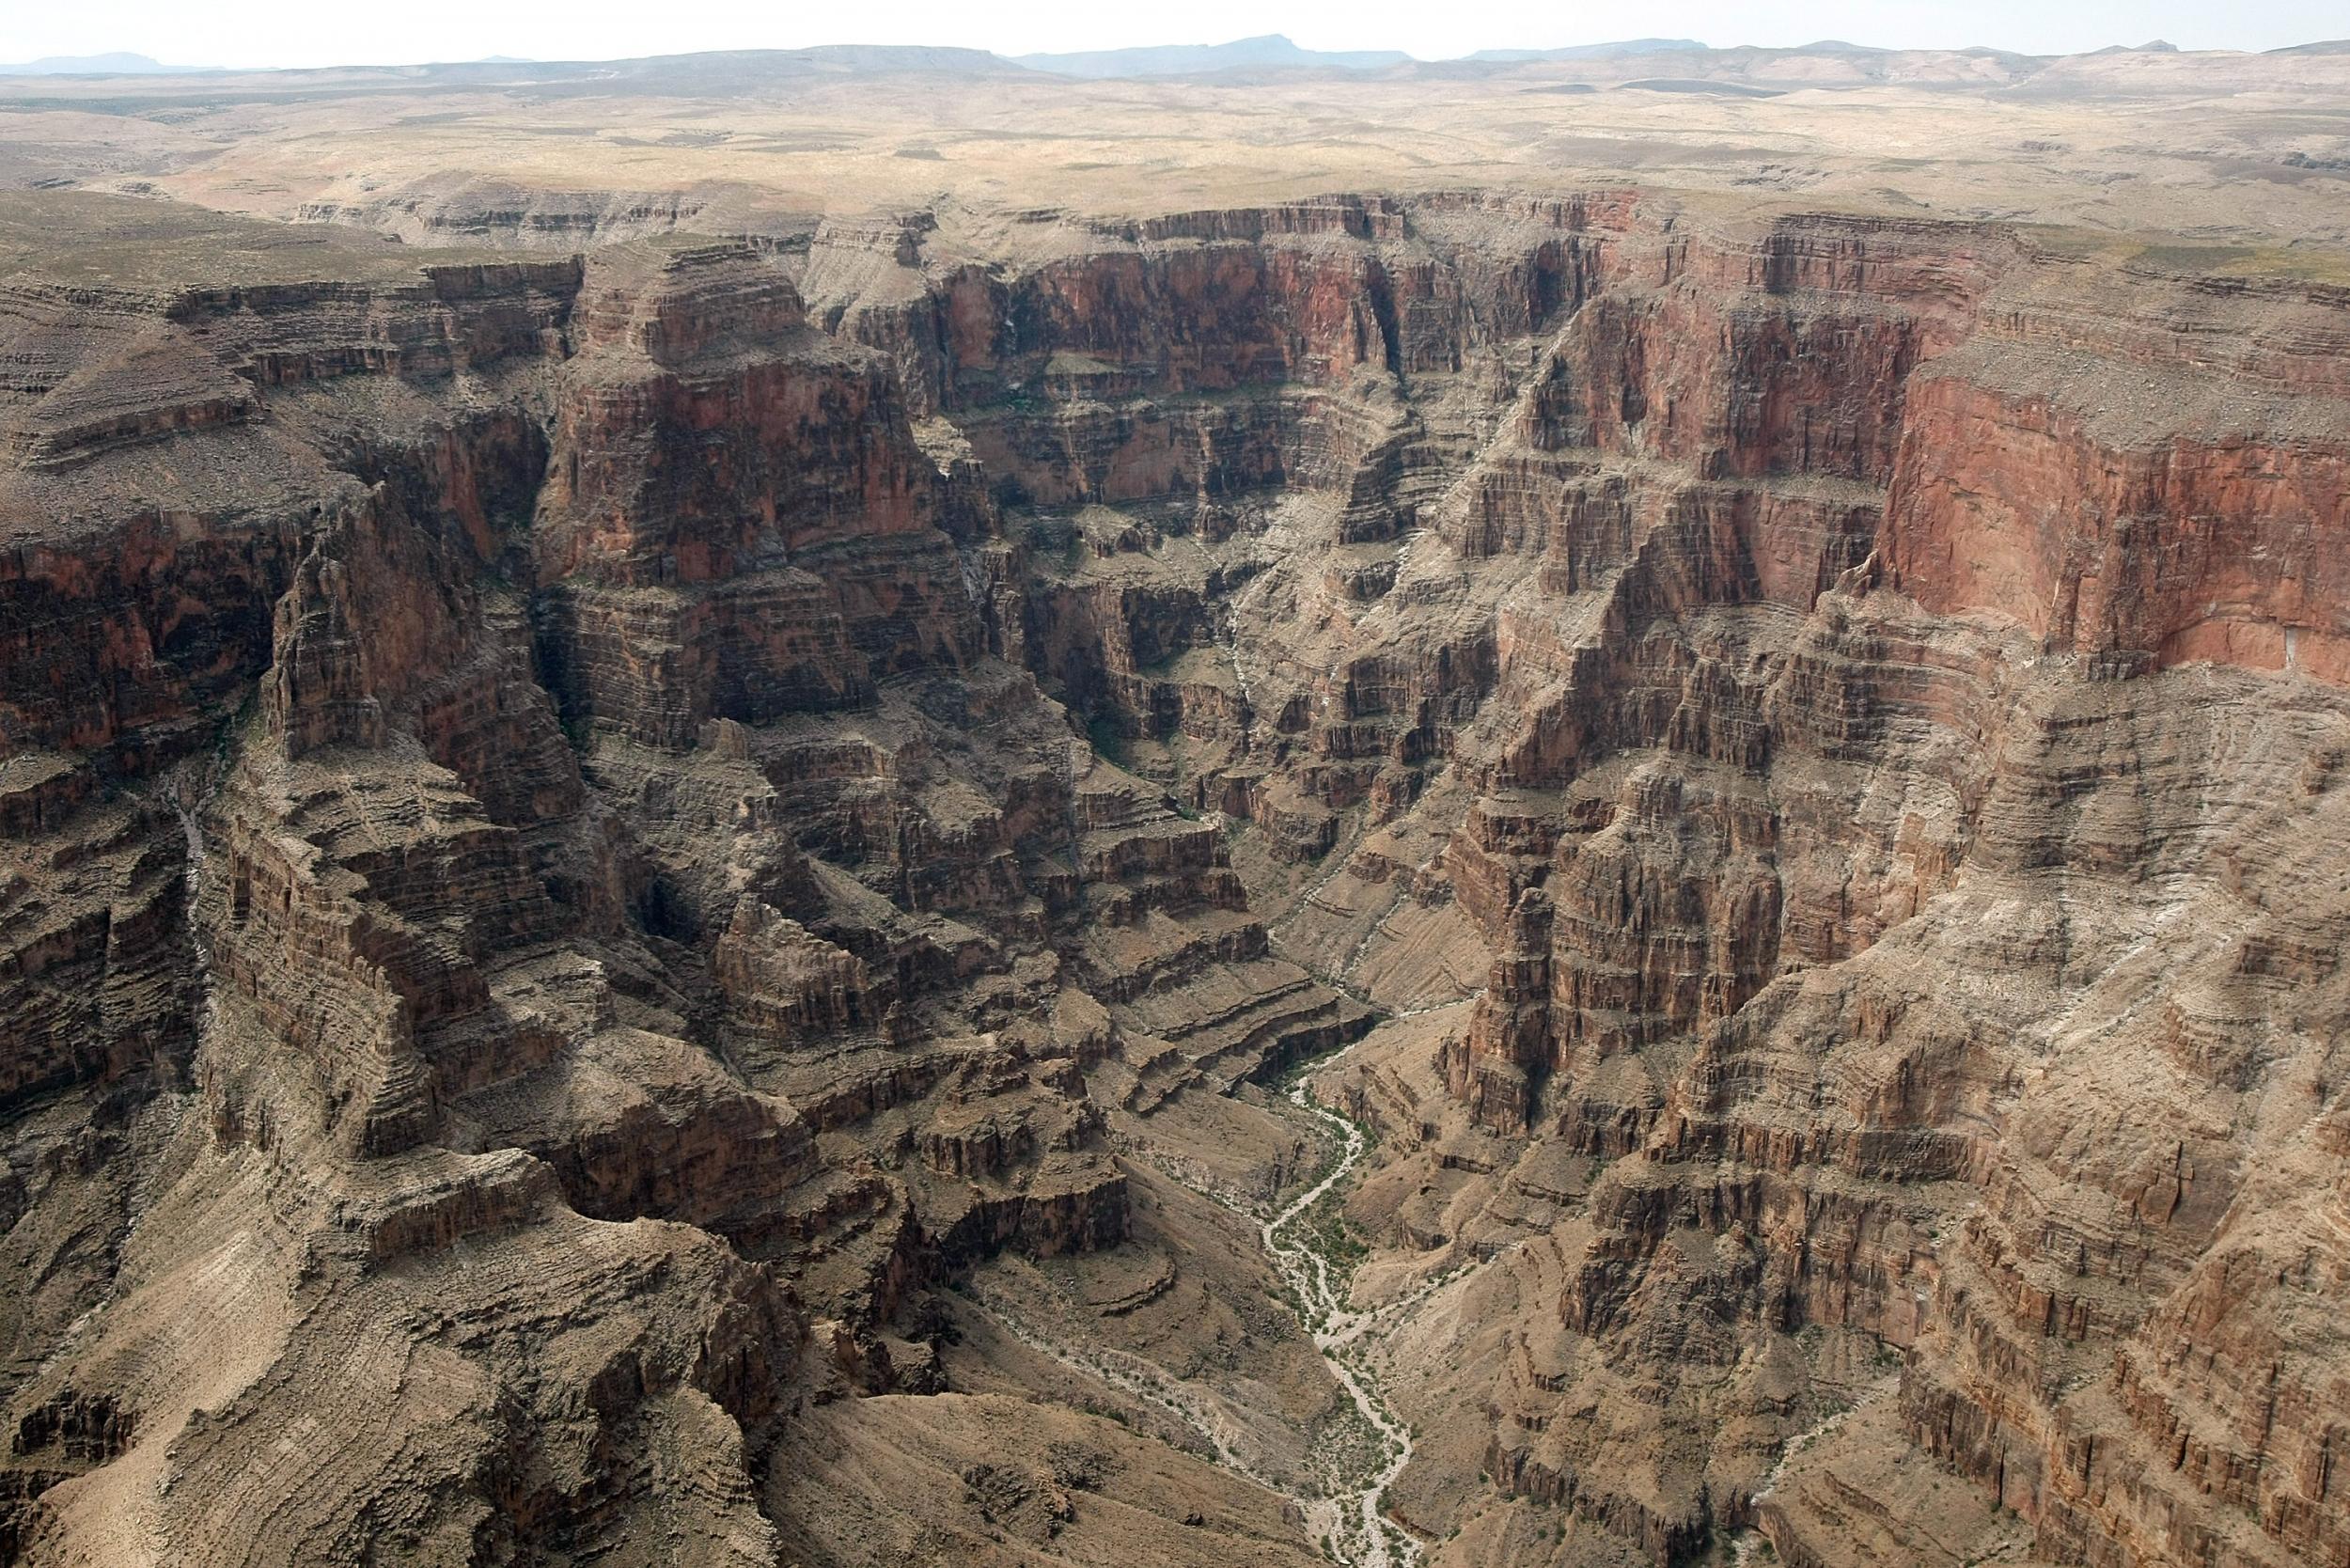 The Grand Canyon in Arizona is deemed worth the fuss